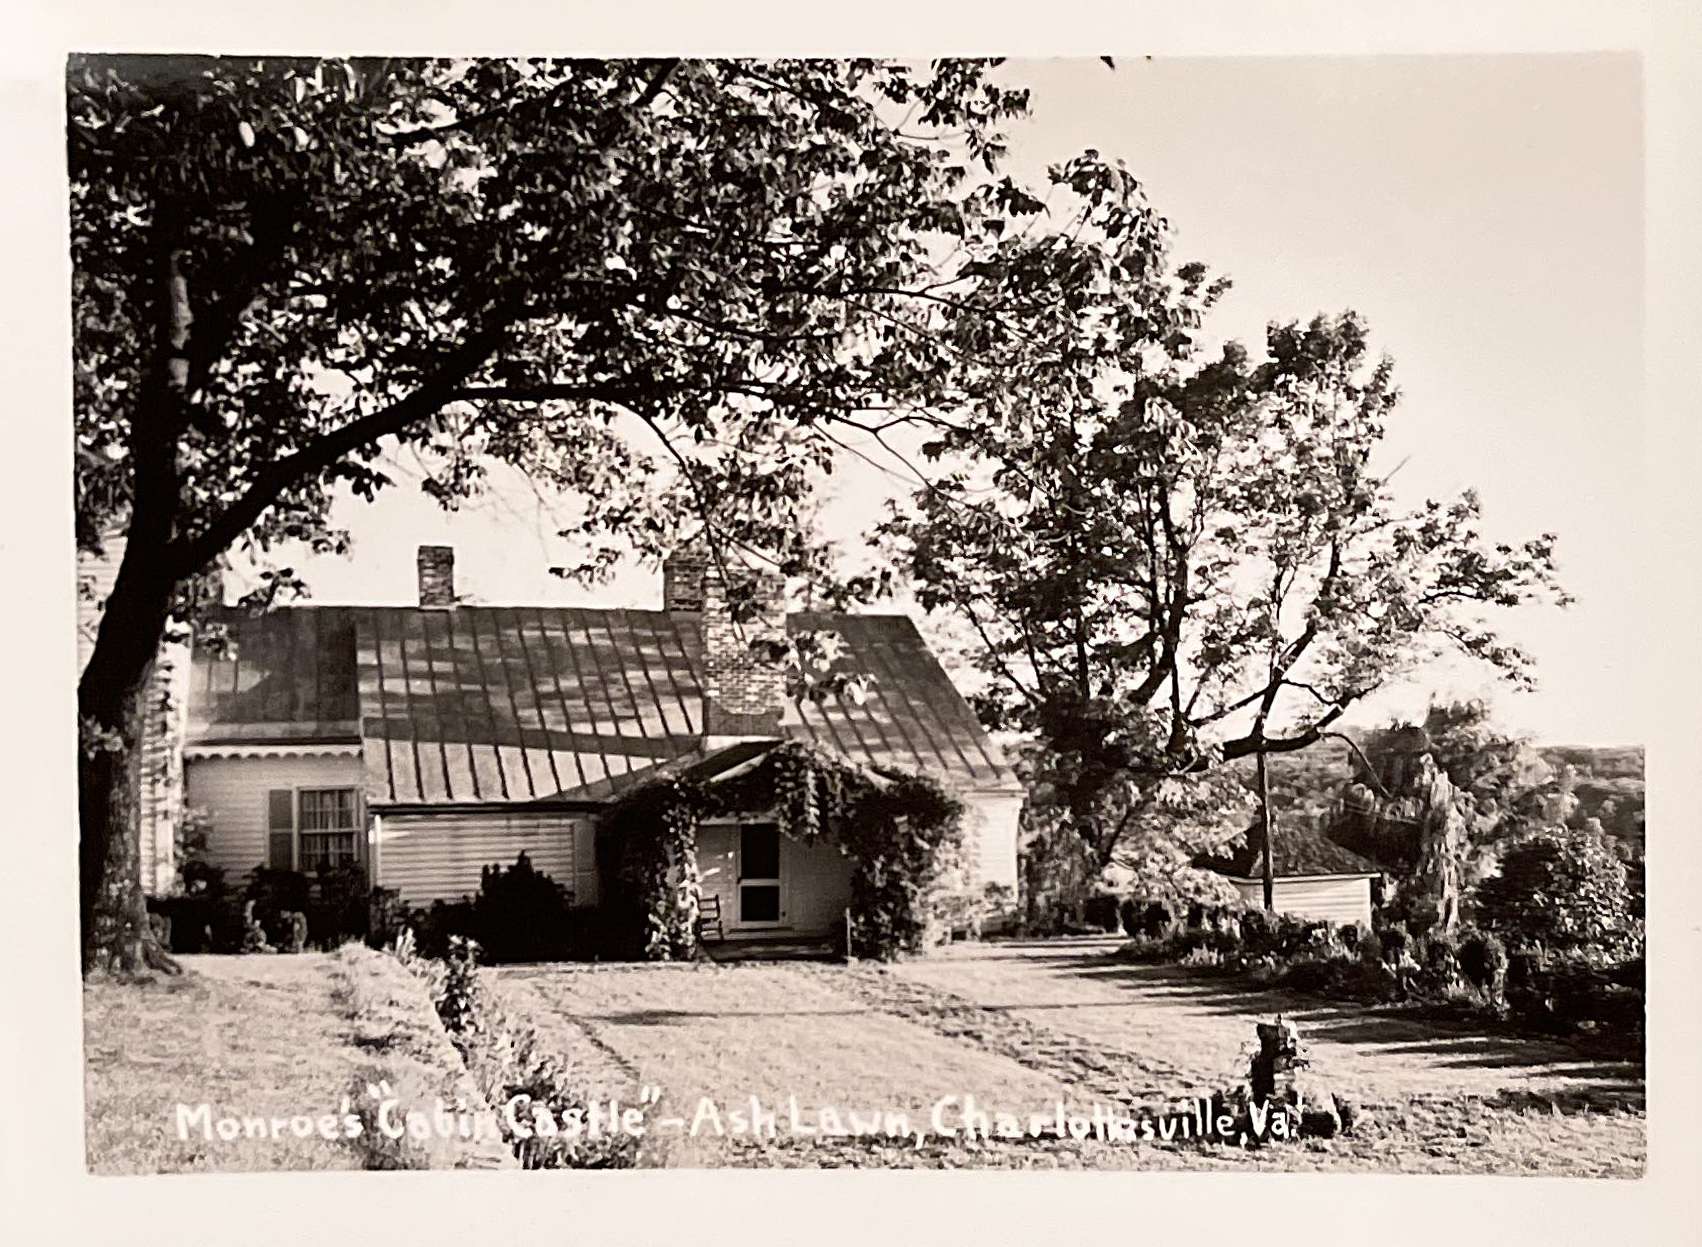 A black and white photo of a small cottage captioned as “Monroe’s ‘Cabin Castle’—Ash Lawn, Charlottesville, Va.